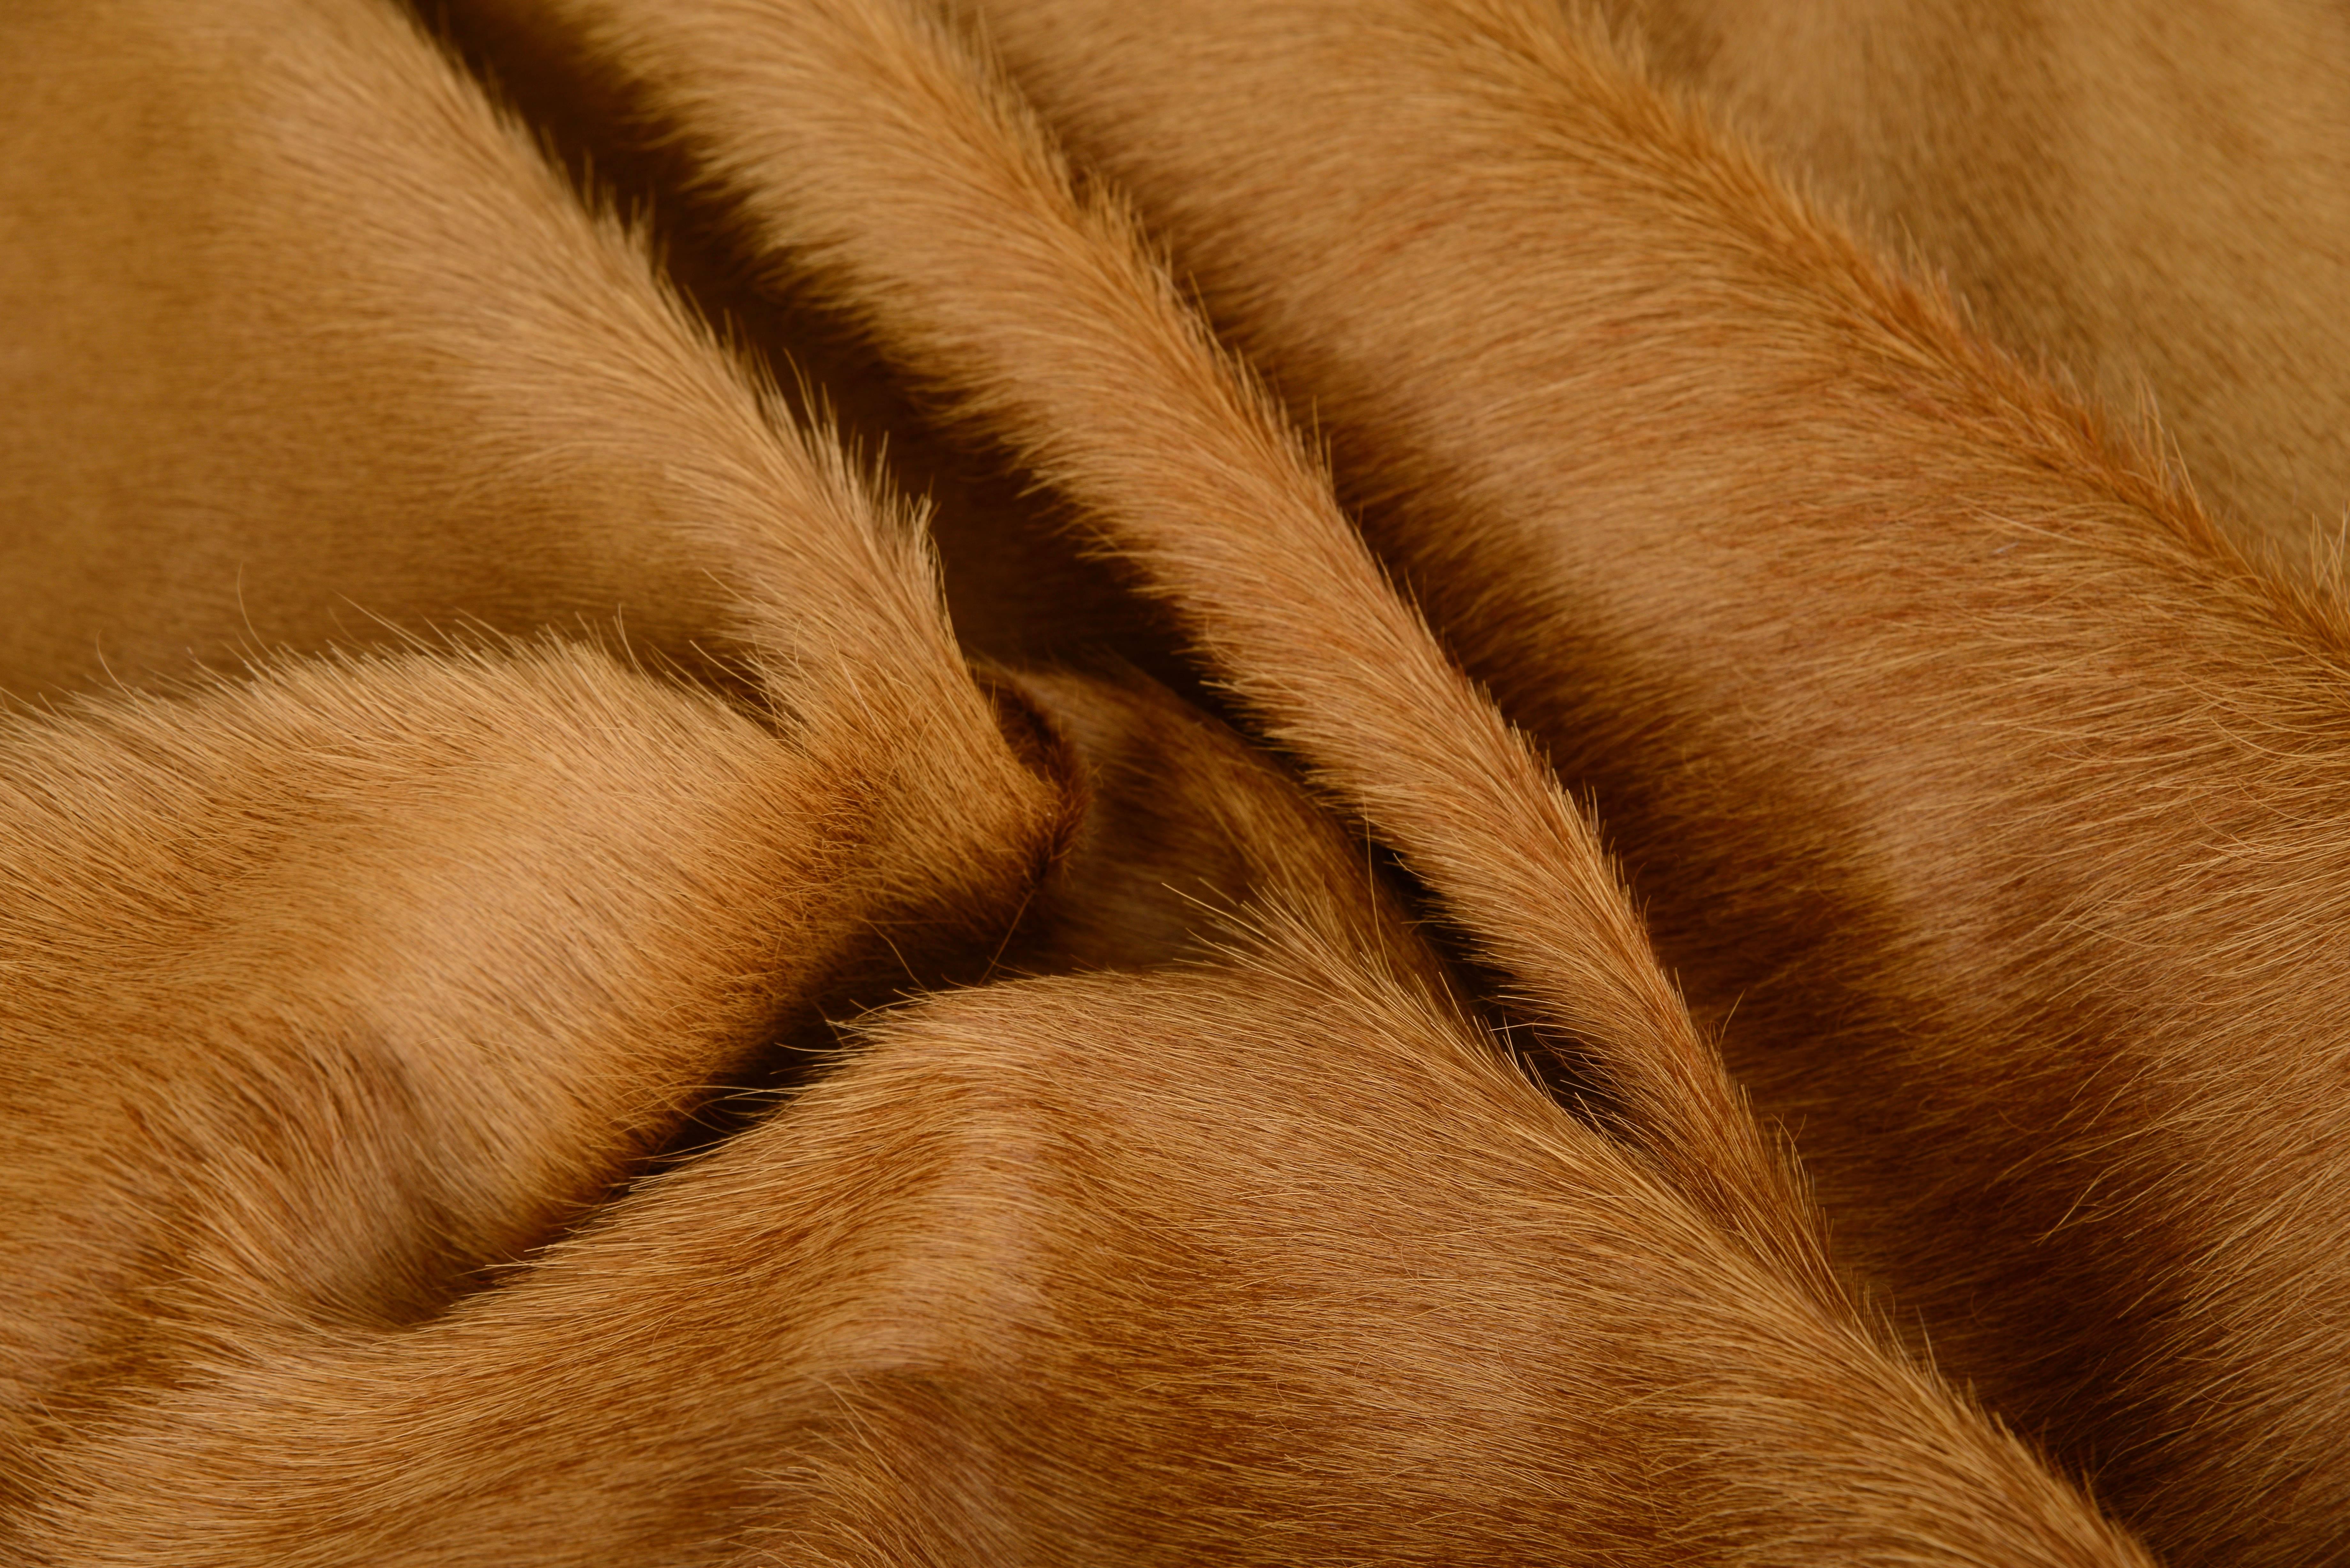 Caramel cow hide hair rug:

All of our hair cow hides are full hides and measure approximately 7' W x 8' L. They are of the highest quality from the French region of Normandy and naturally raised in a free roaming field. The hair of these cows is